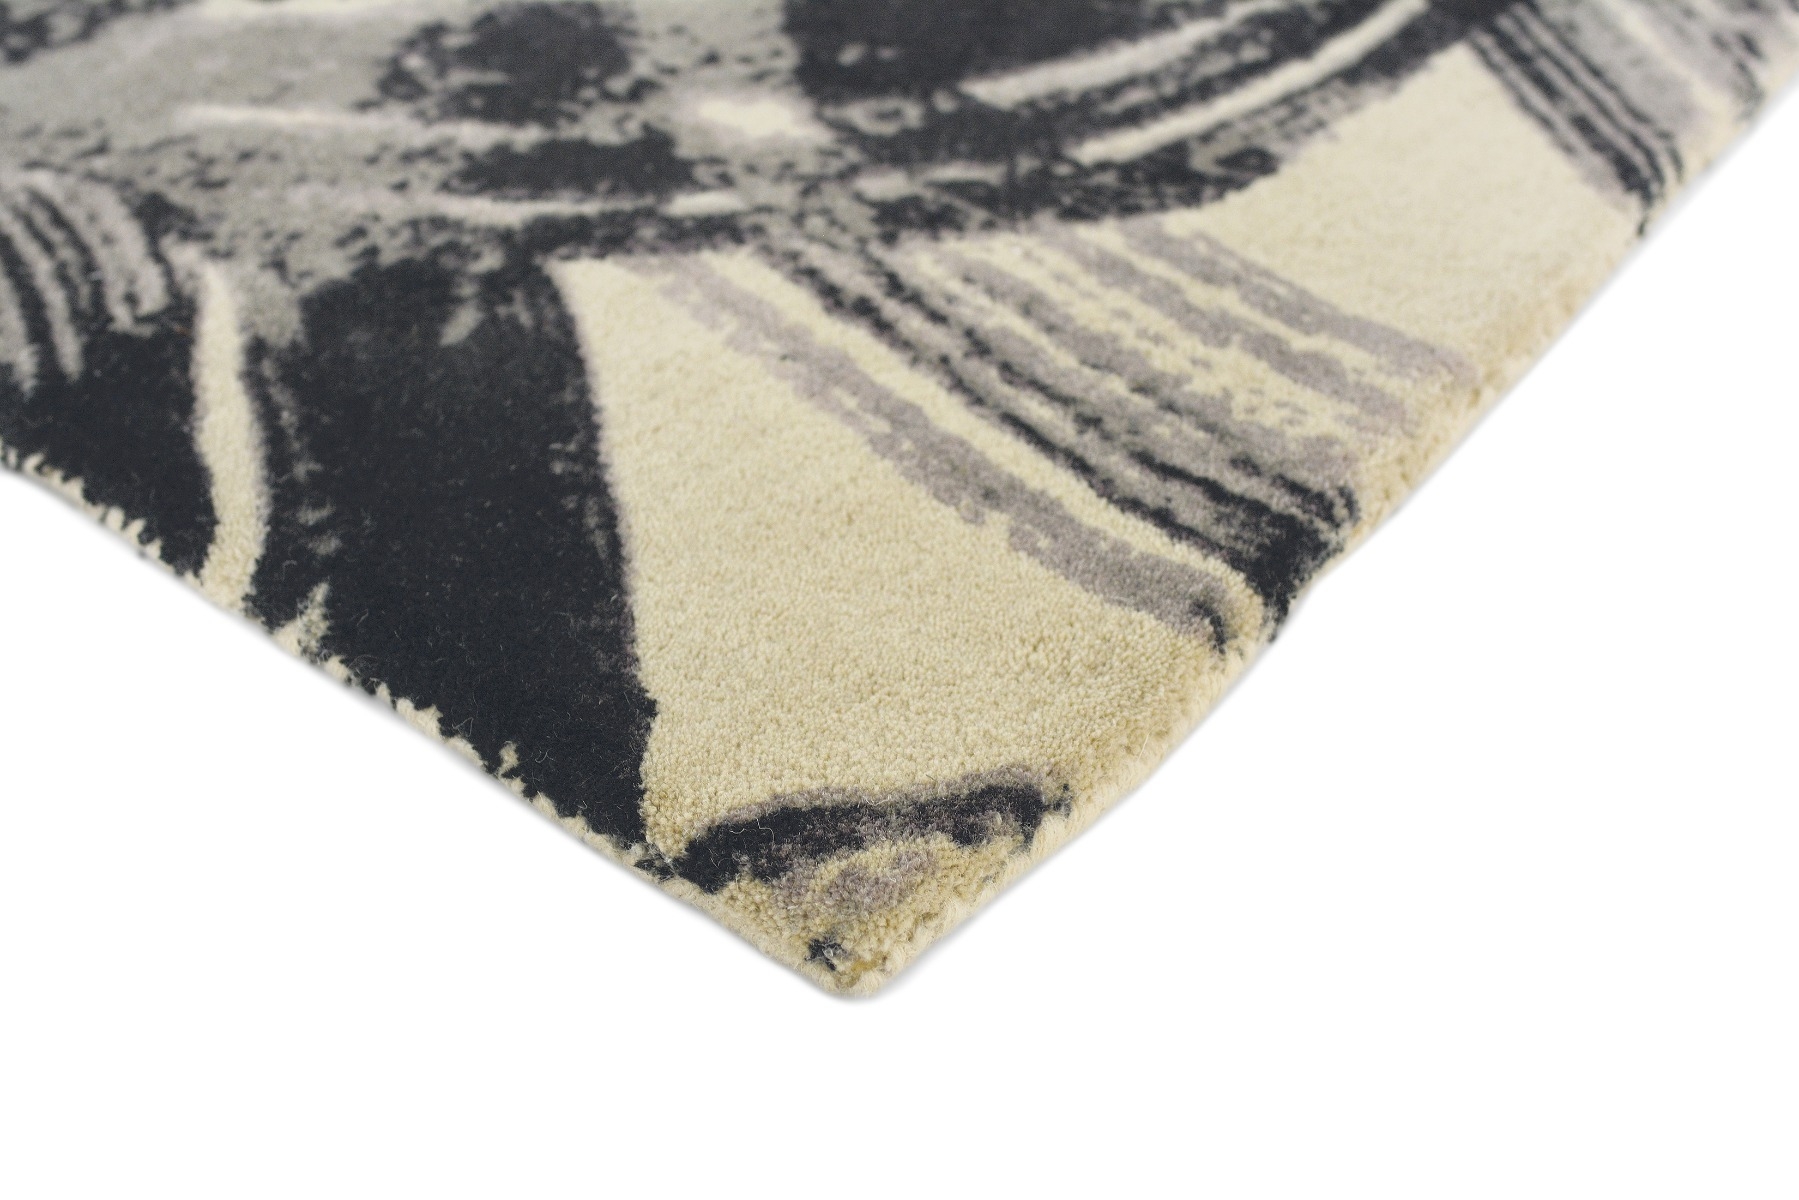 Abstract Black Wool Rug ☞ Size: 4' 7" x 6' 7" (140 x 200 cm)